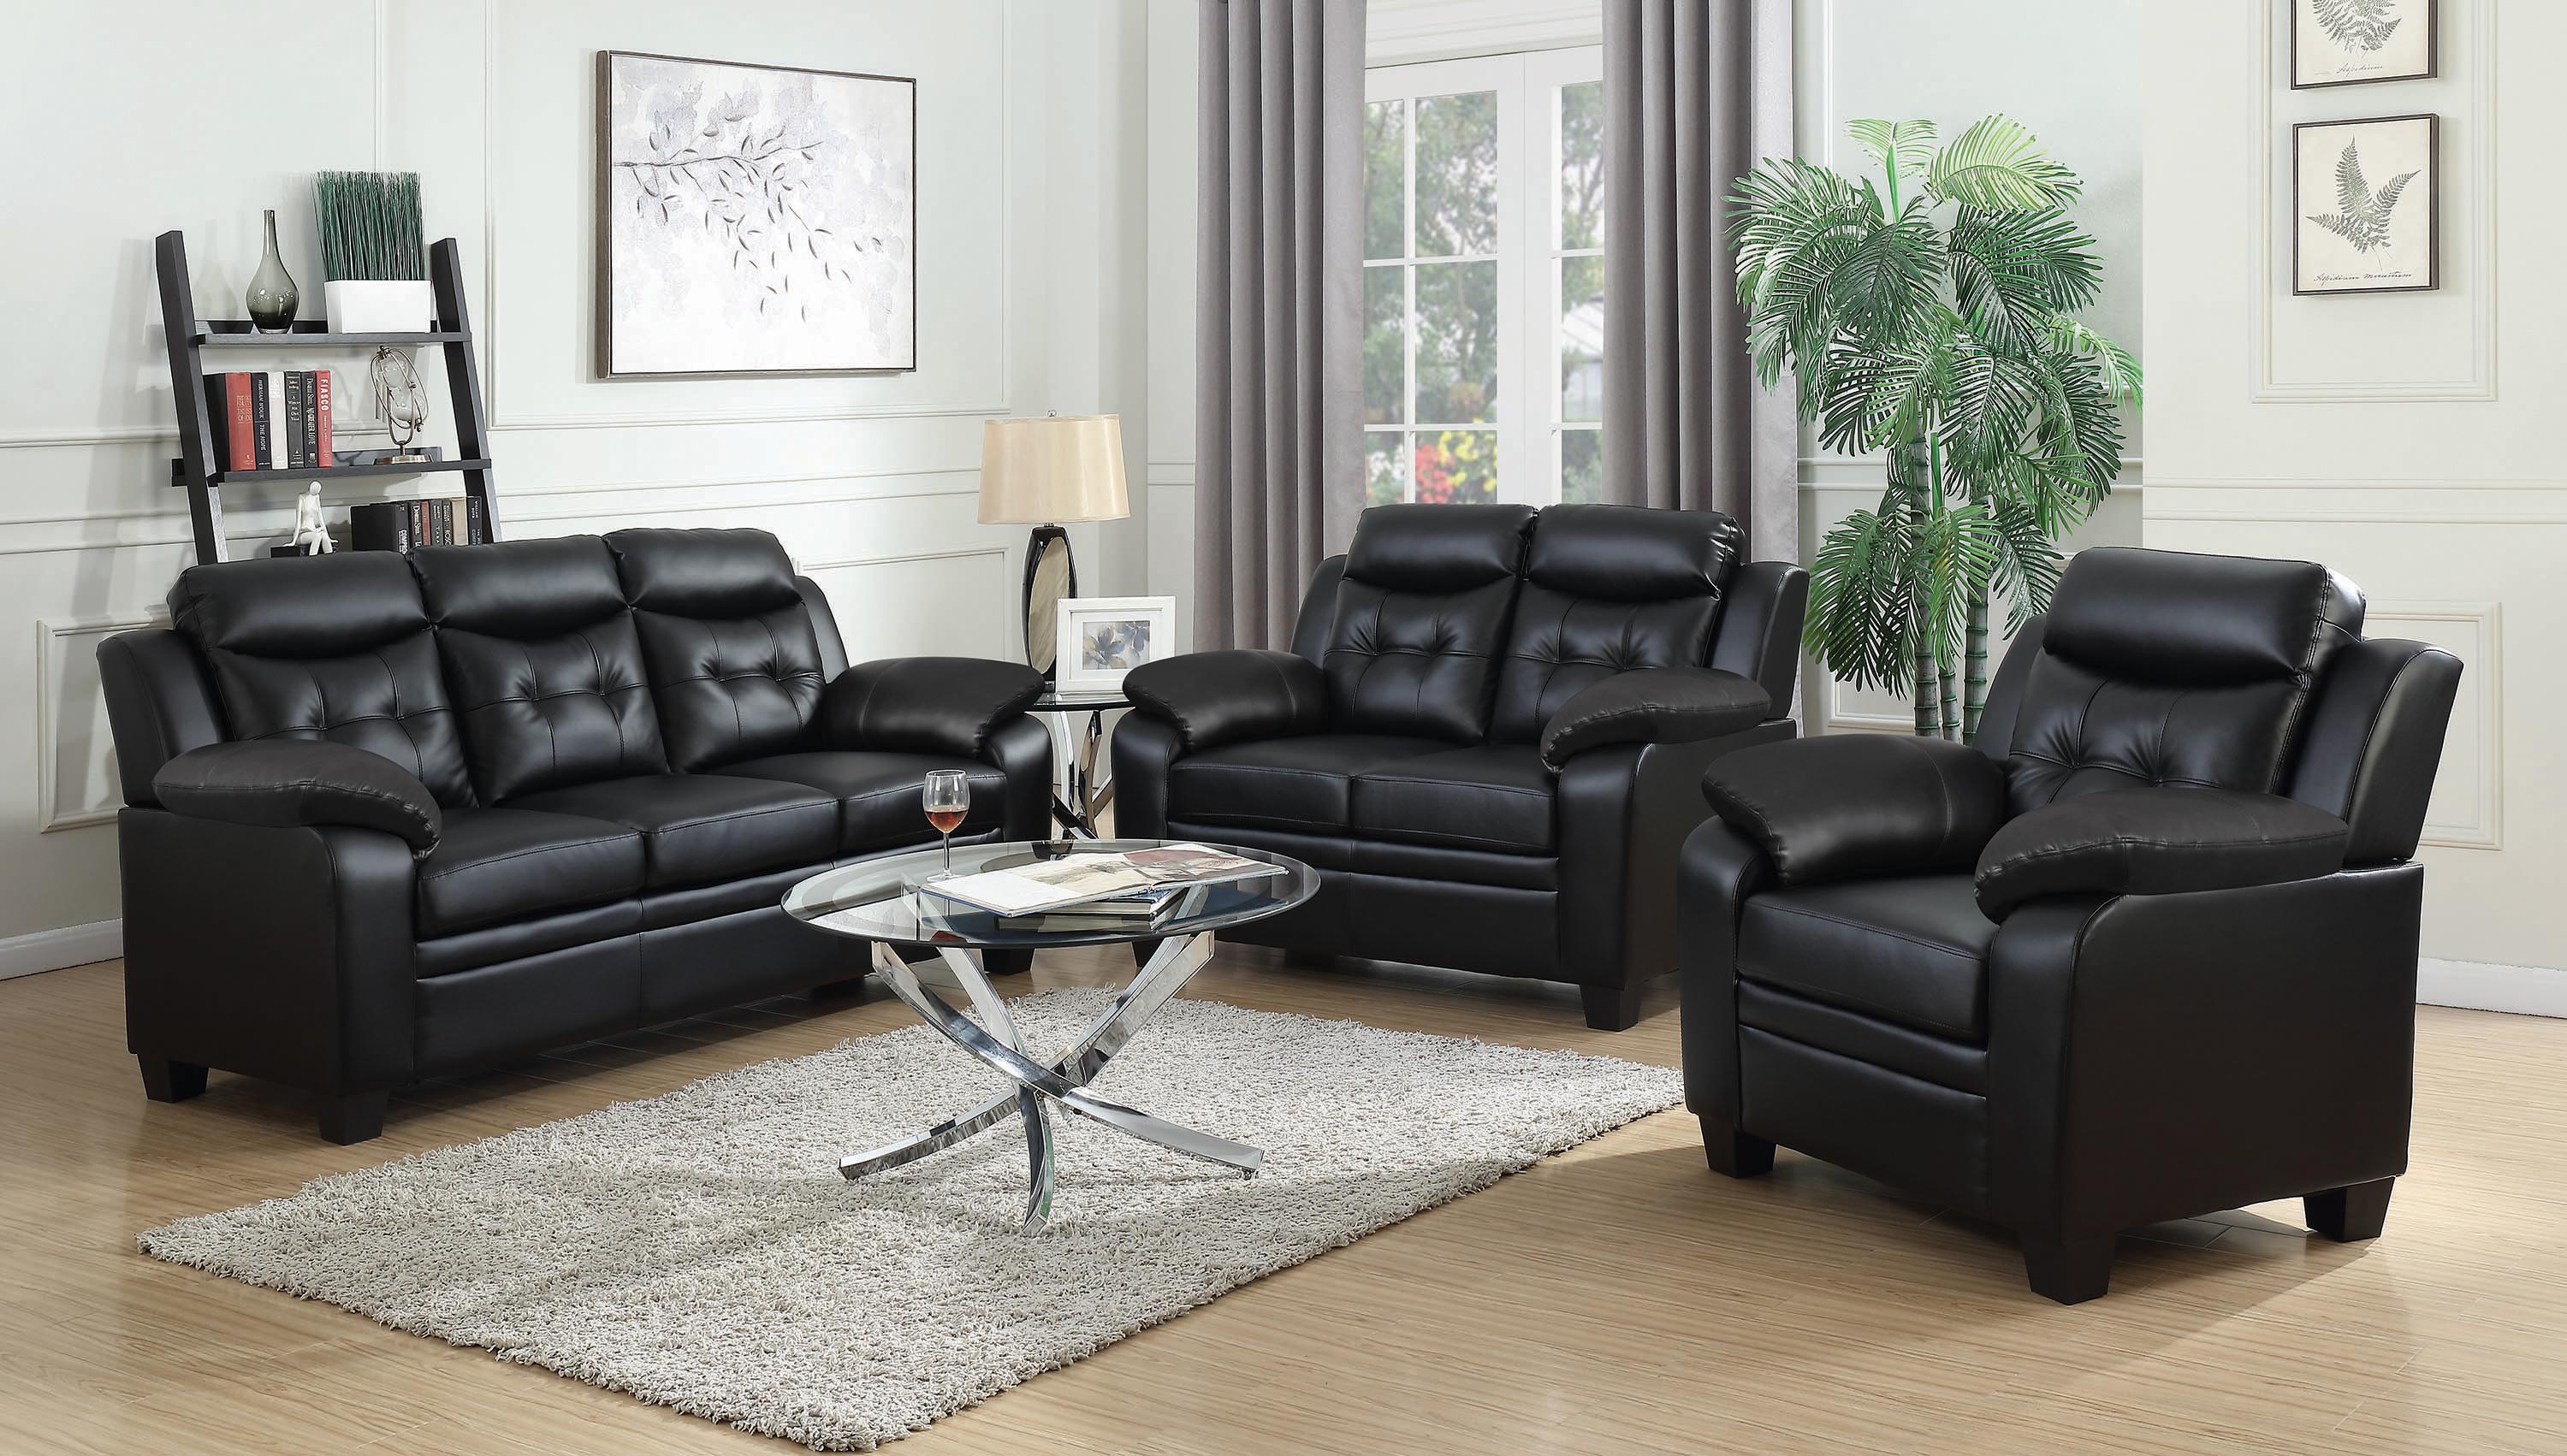 Transitional Living Room Set 506551-S3 Finley 506551-S3 in Black Leatherette